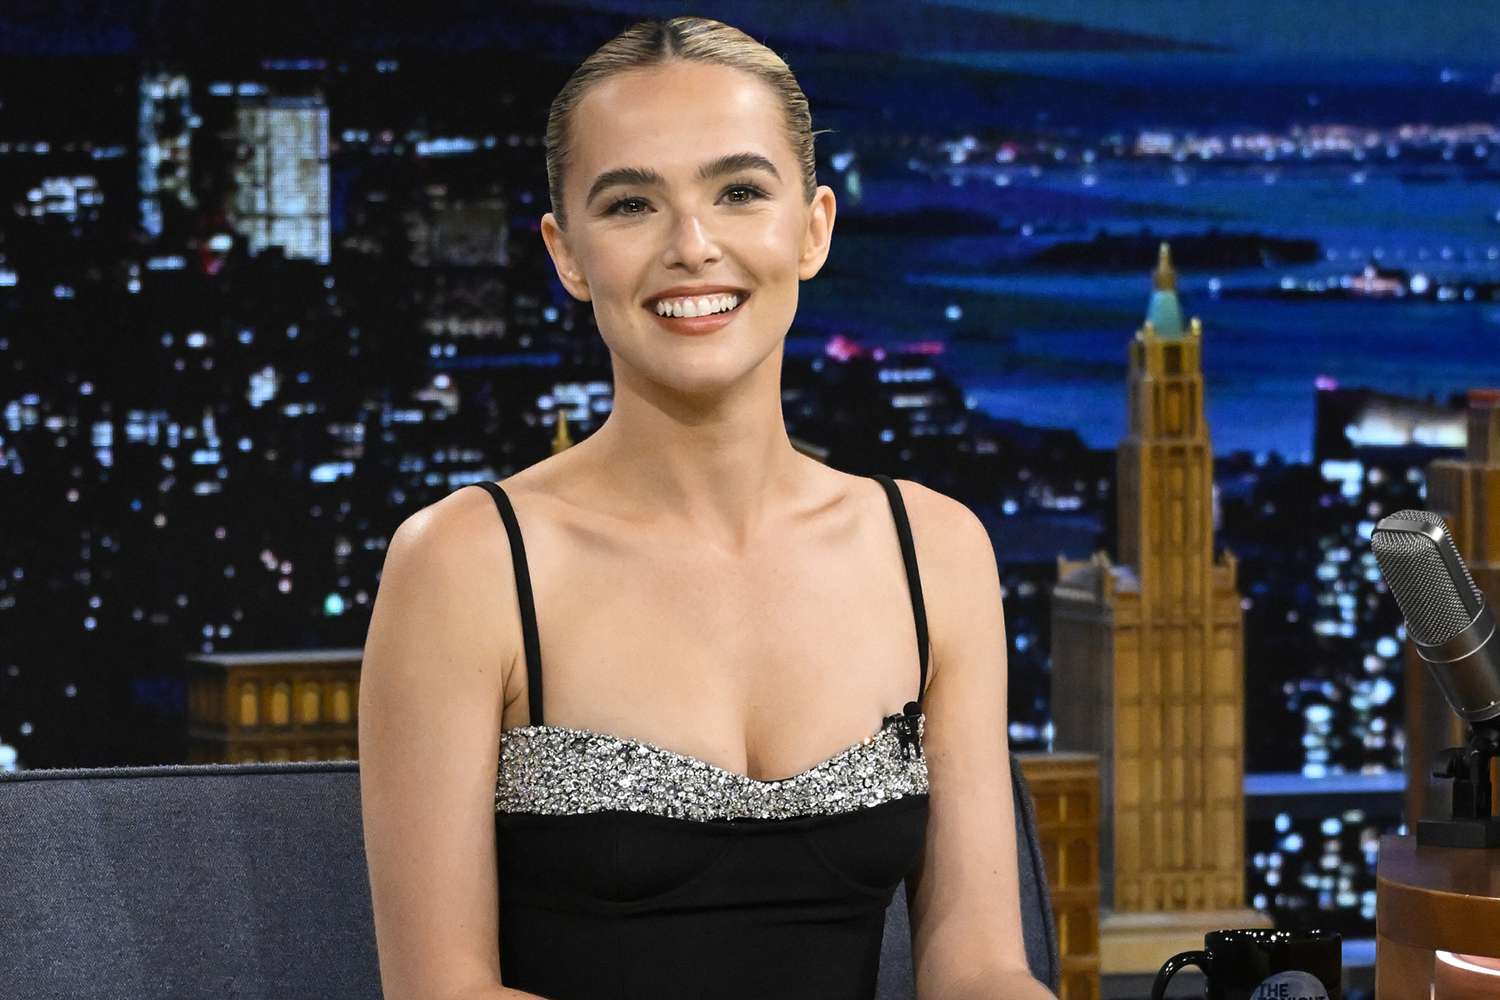 Zoey Deutch during an interview with host Jimmy Fallon